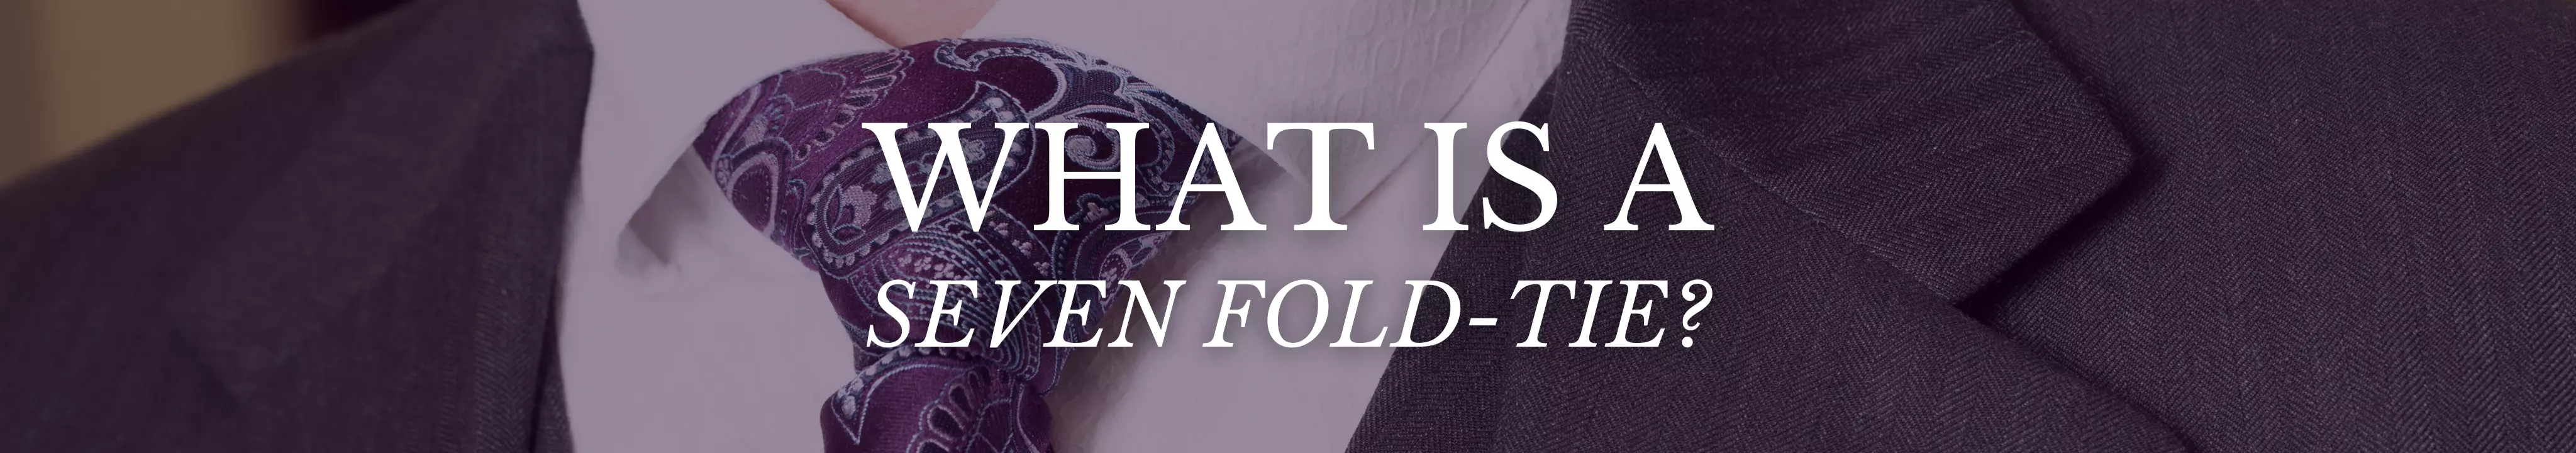 What is a Seven fold-tie?